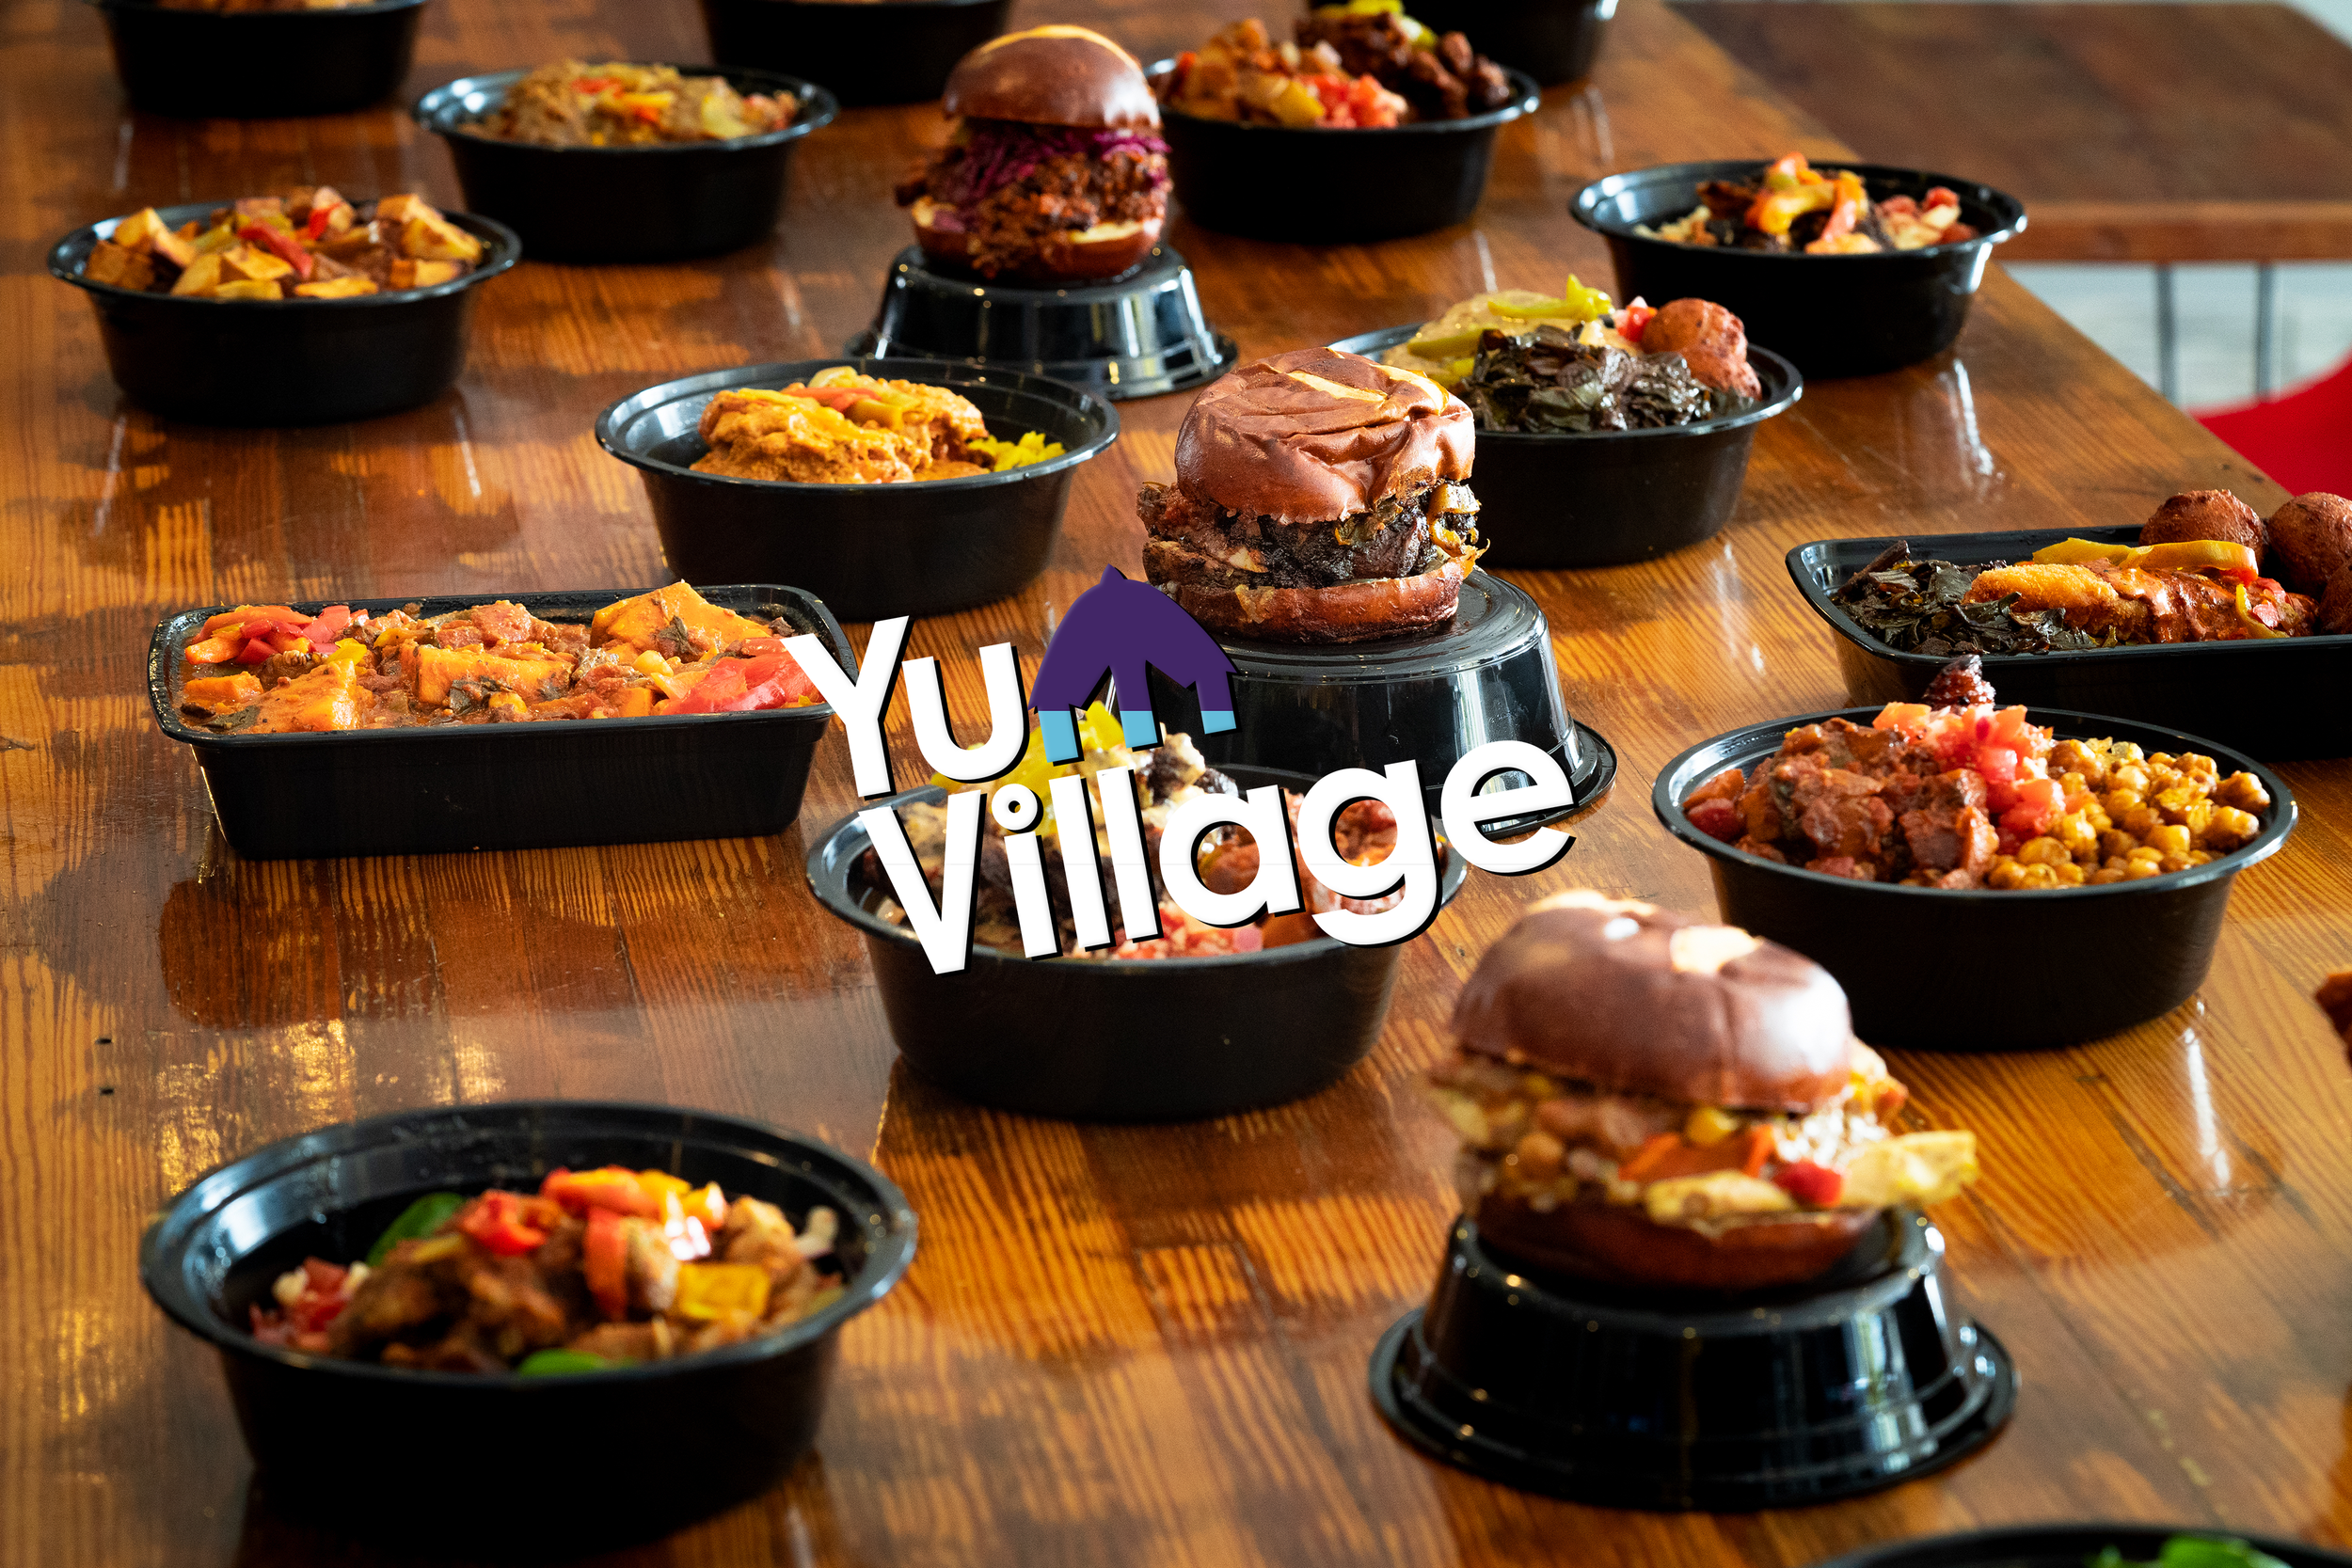 Yum Village - Local, Chef Made, Afro Caribbean Food